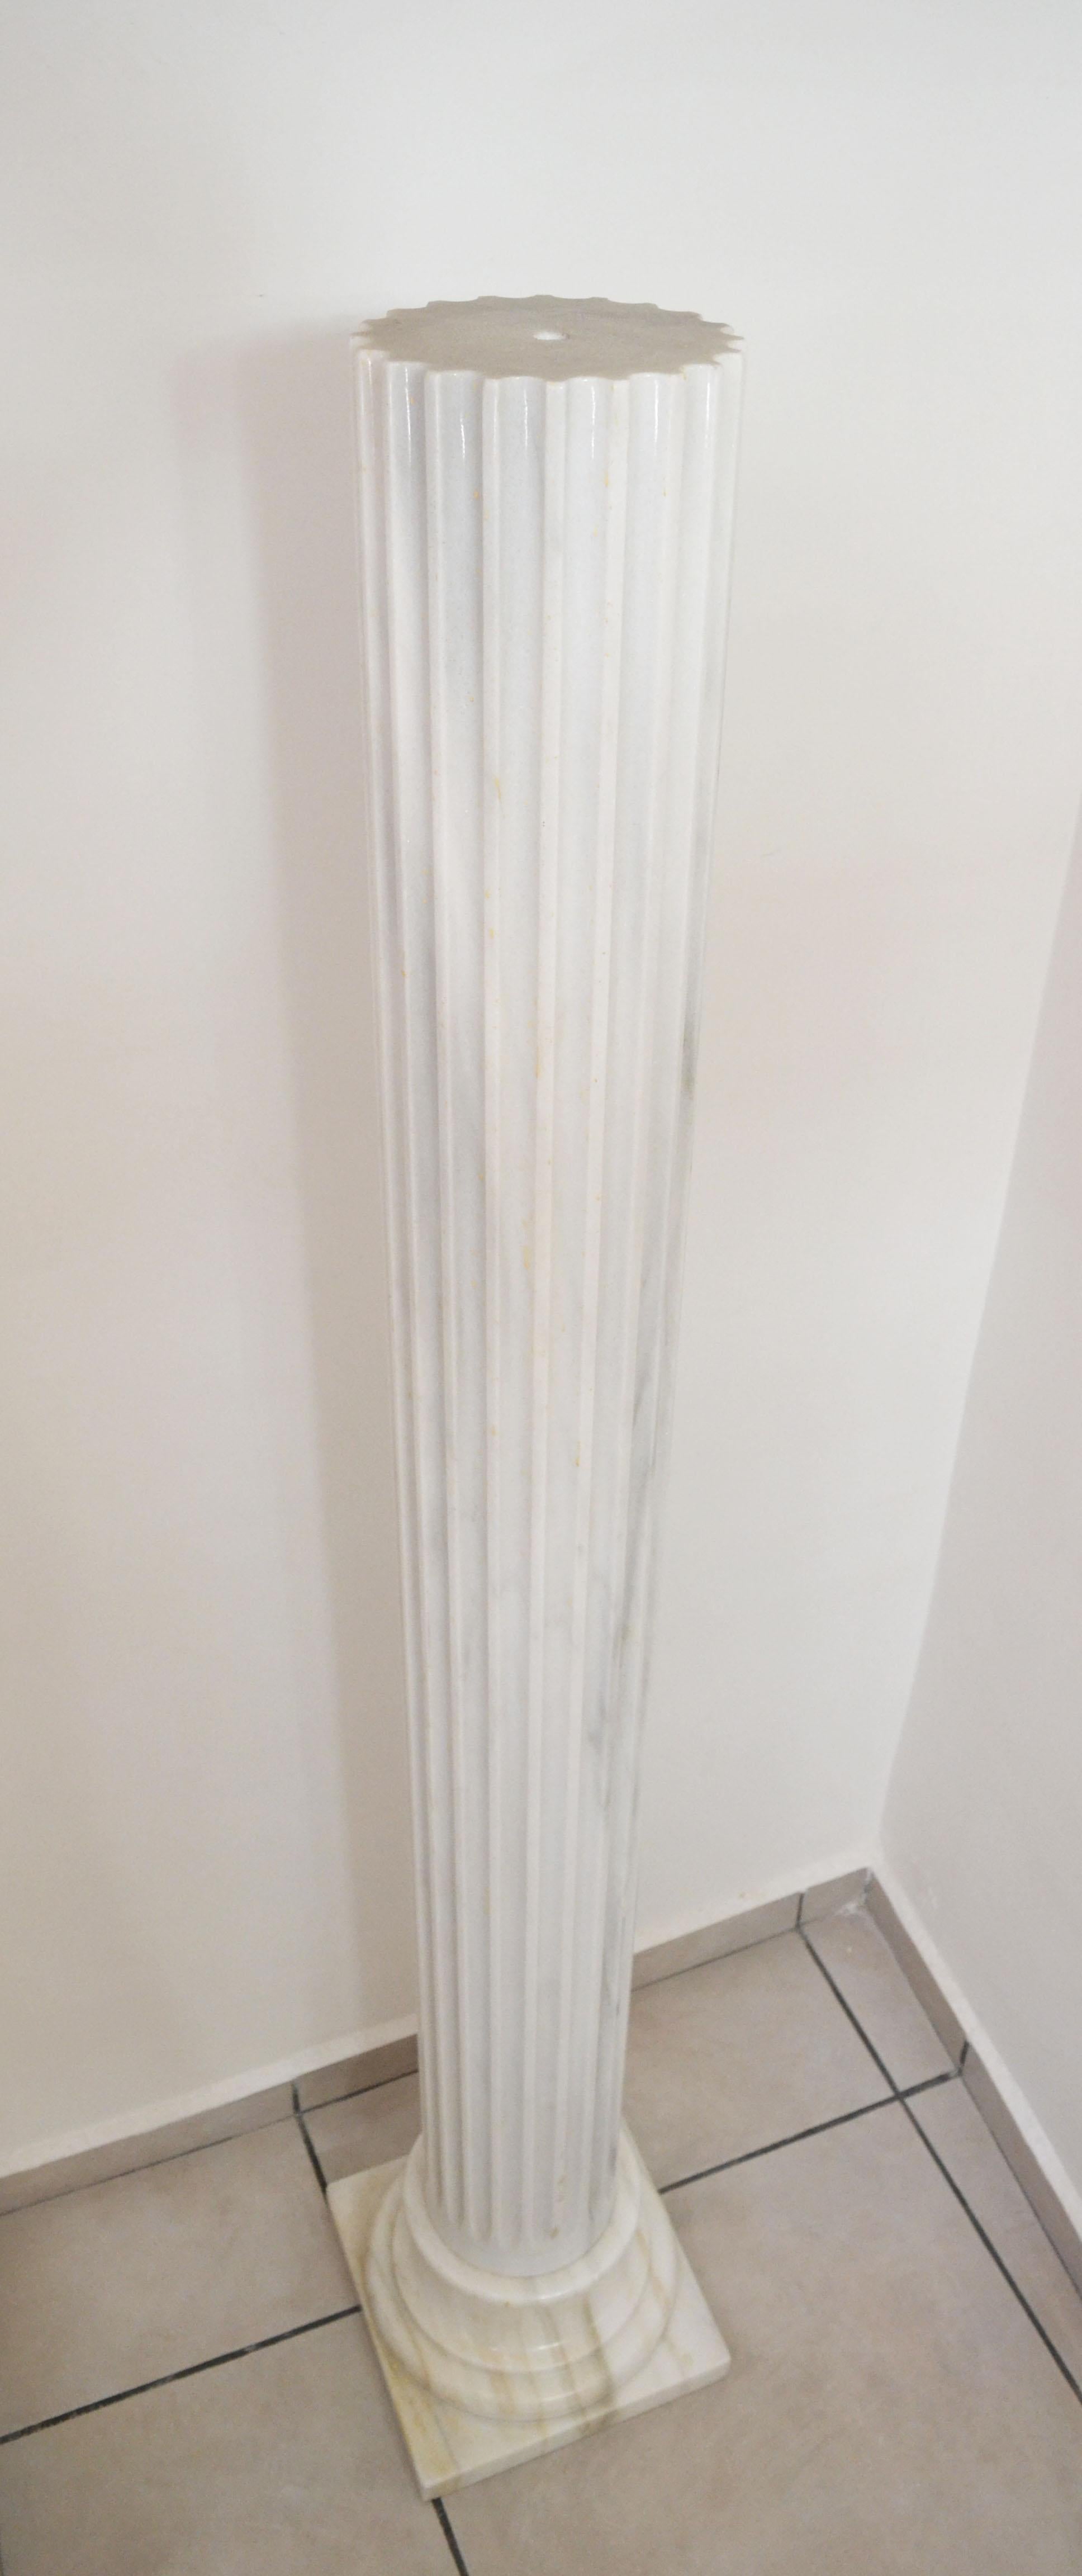 A gorgeous classical Athenian style column / pillar in wonderful white Cararra marble sourced from Italy.

This is a large grand which will come up to or above head height for most people.

It has a lovely natural colour with which features a